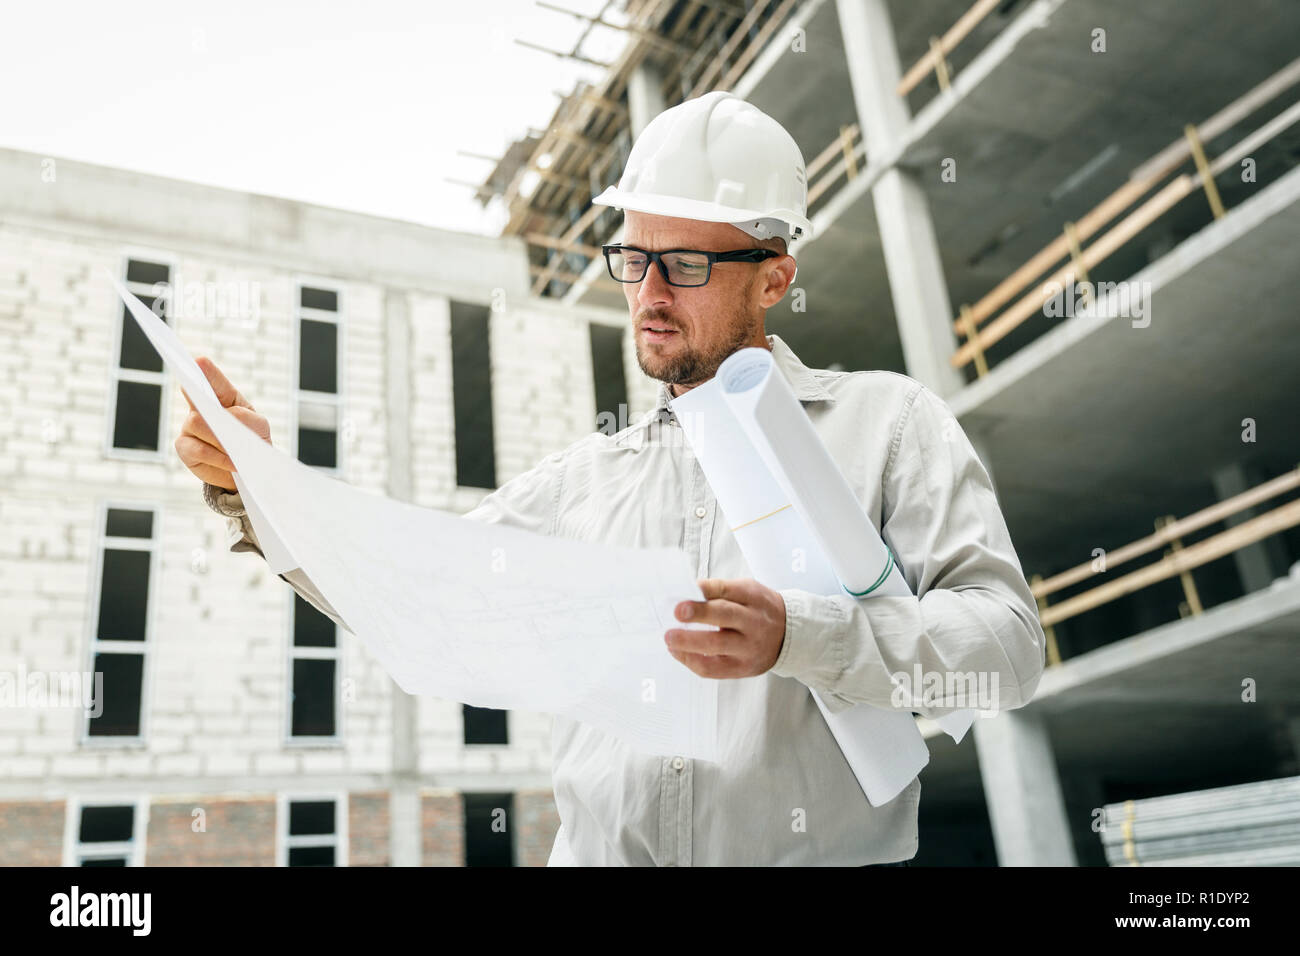 Construction engineer in a white hardhat inspecting blueprints on a construction site. Development and construction industry concept Stock Photo